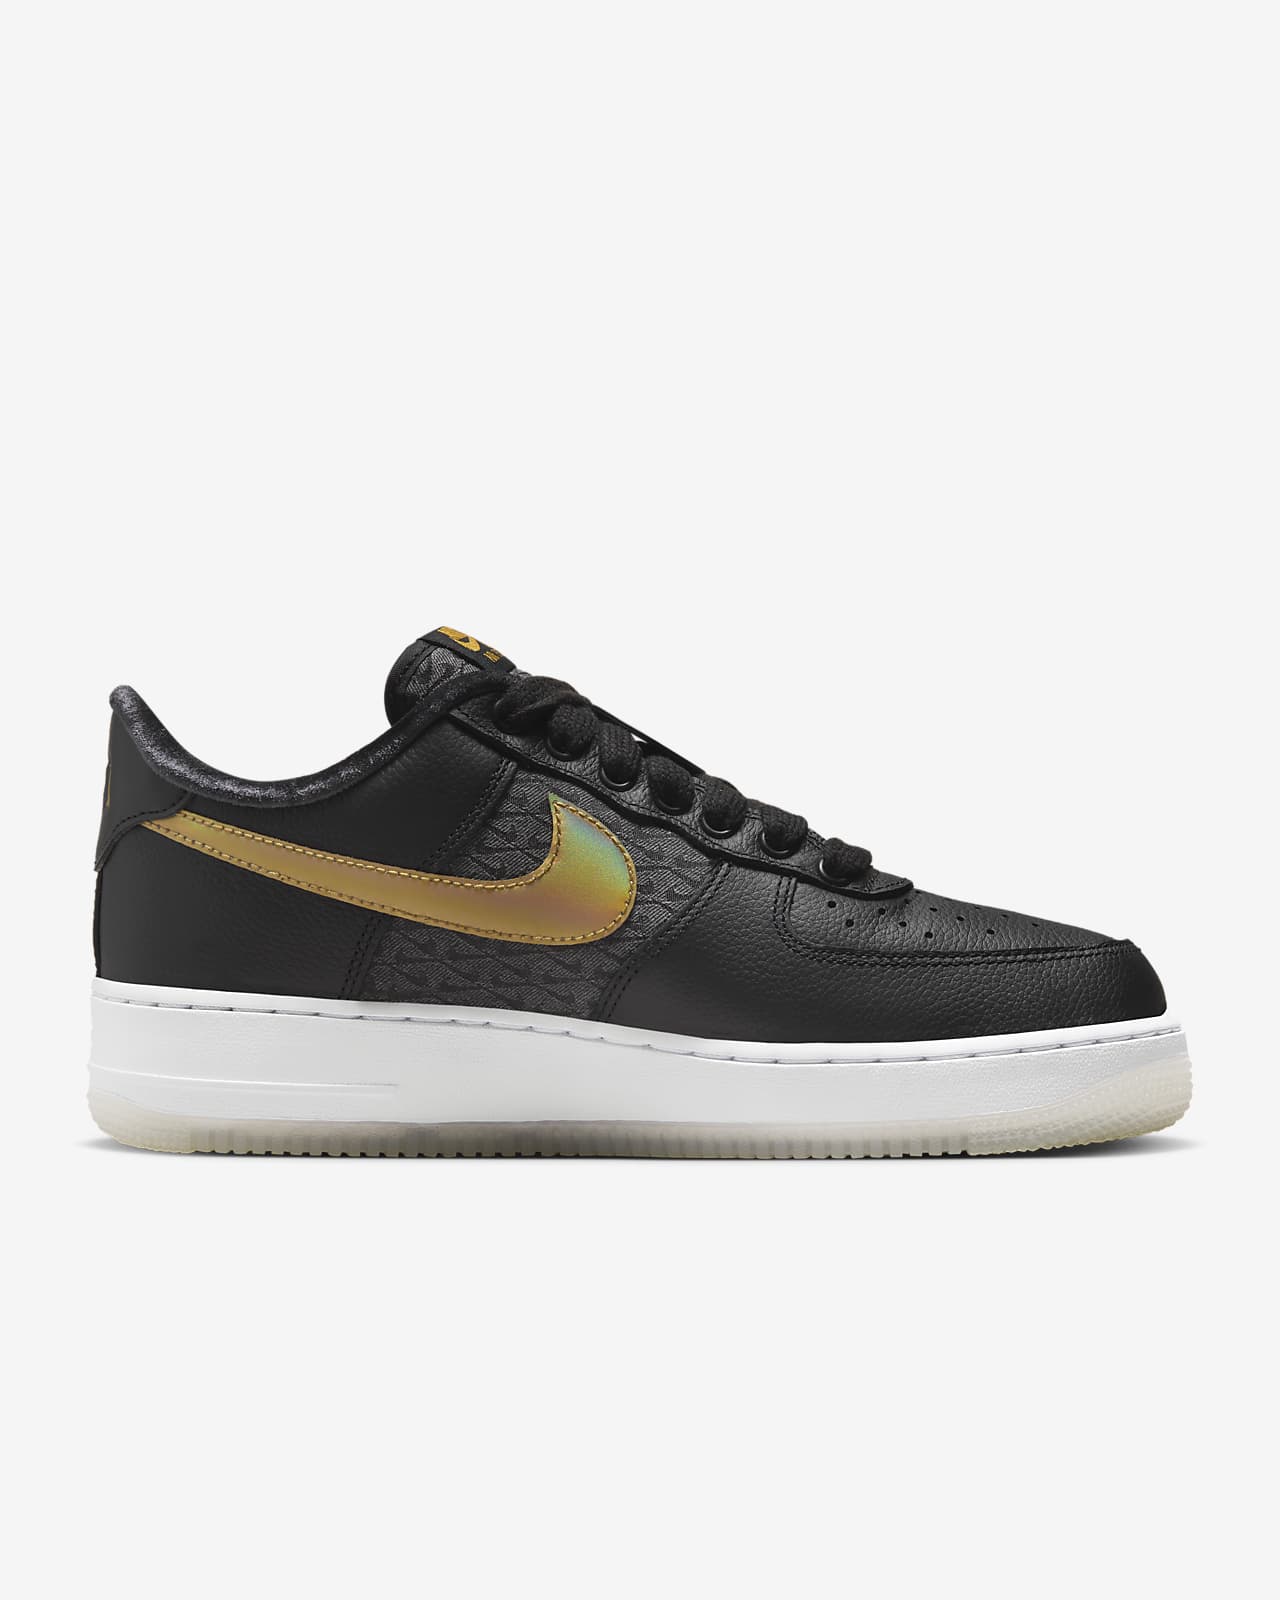 Nike Air Force 1 Low '07 LV8 'Gold' Gold/Gold Sneakers/Shoes